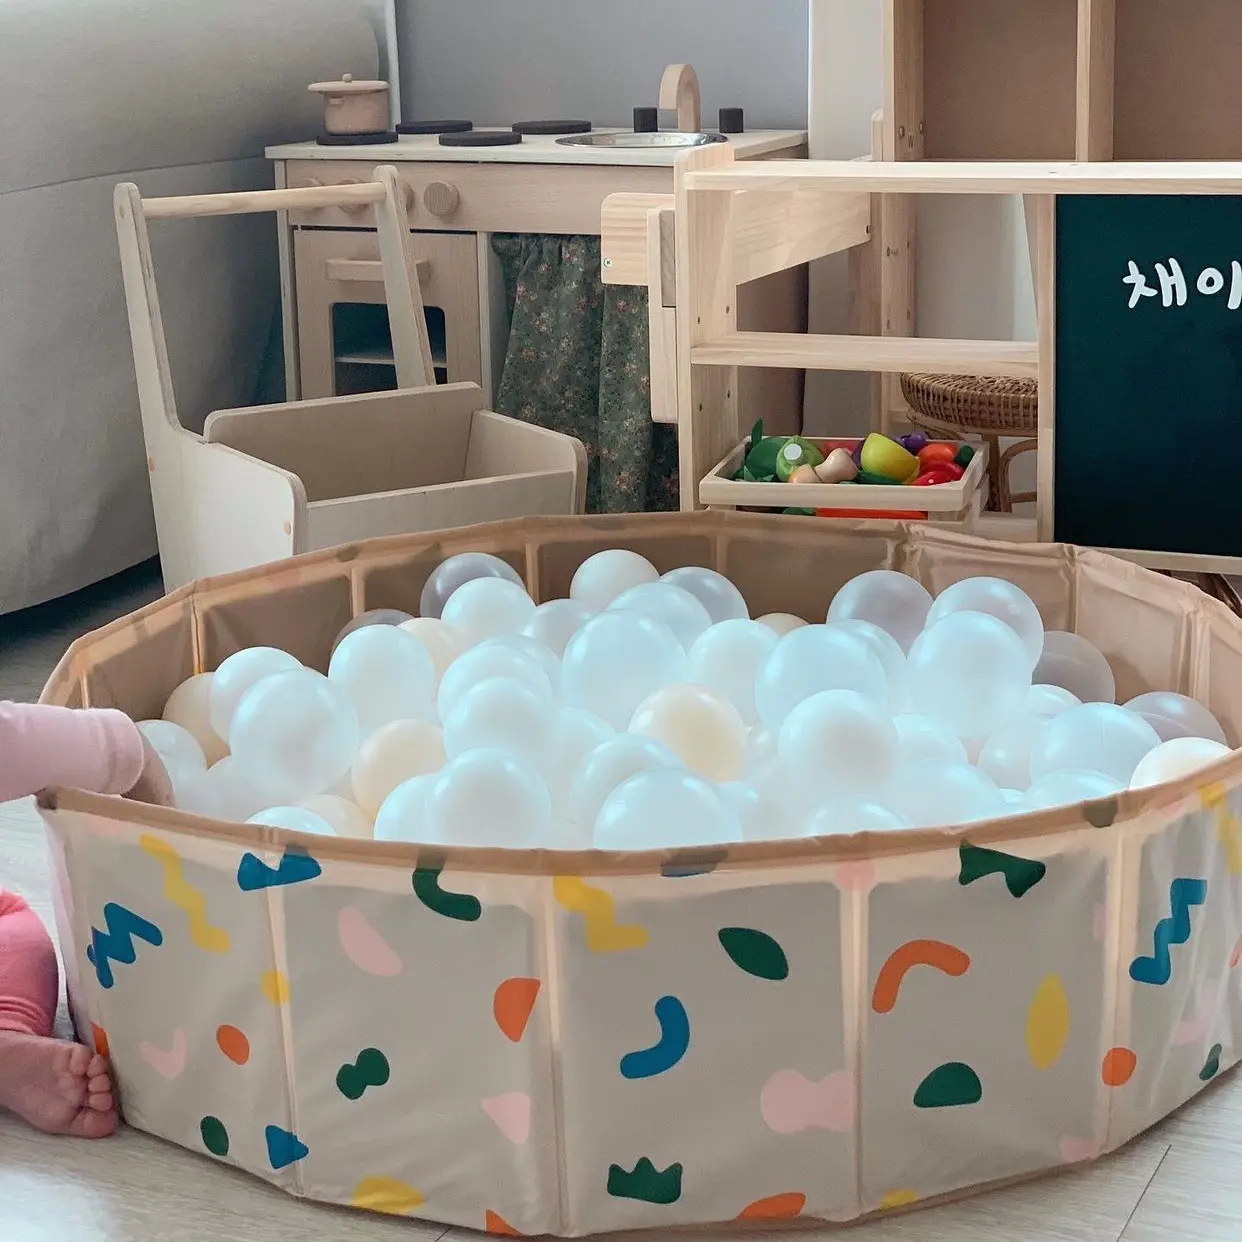 Baby Soft Ocean Ball Indoor Kids Playground Home Playhouse Play Ball Pit Pool Dry Pool Balls for Kids